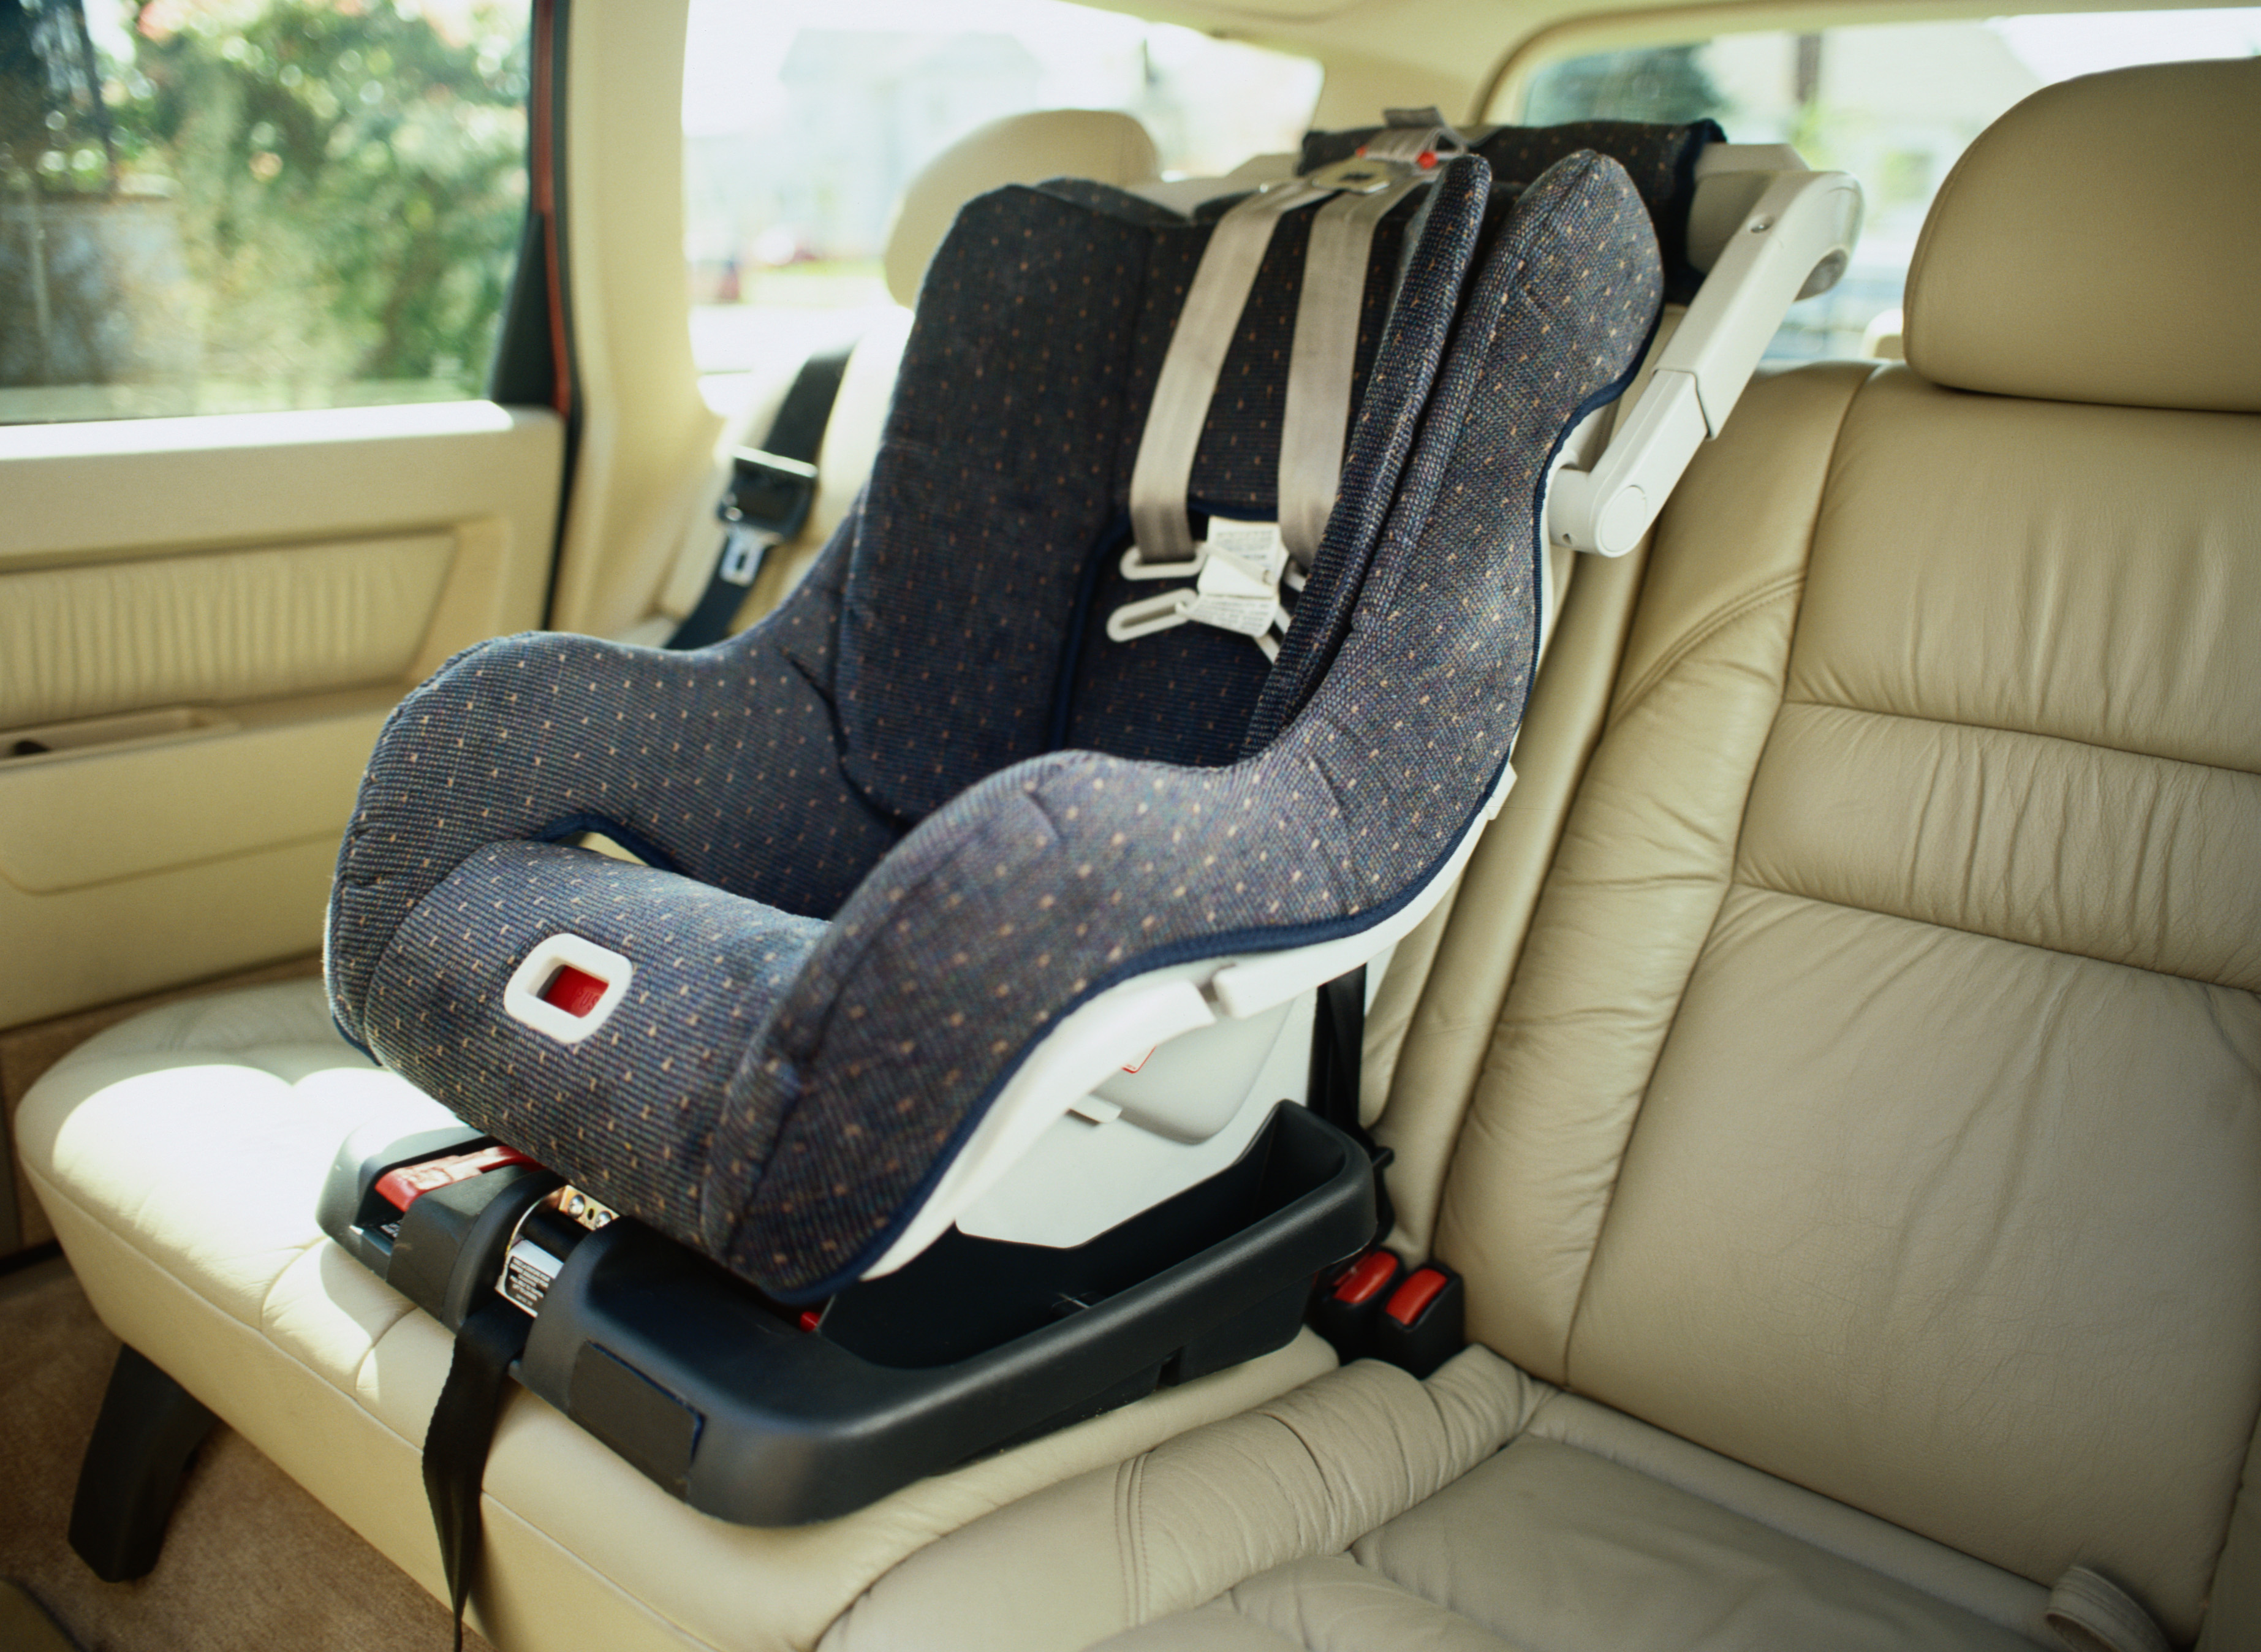 A baby seat is at the centre of the back car seat